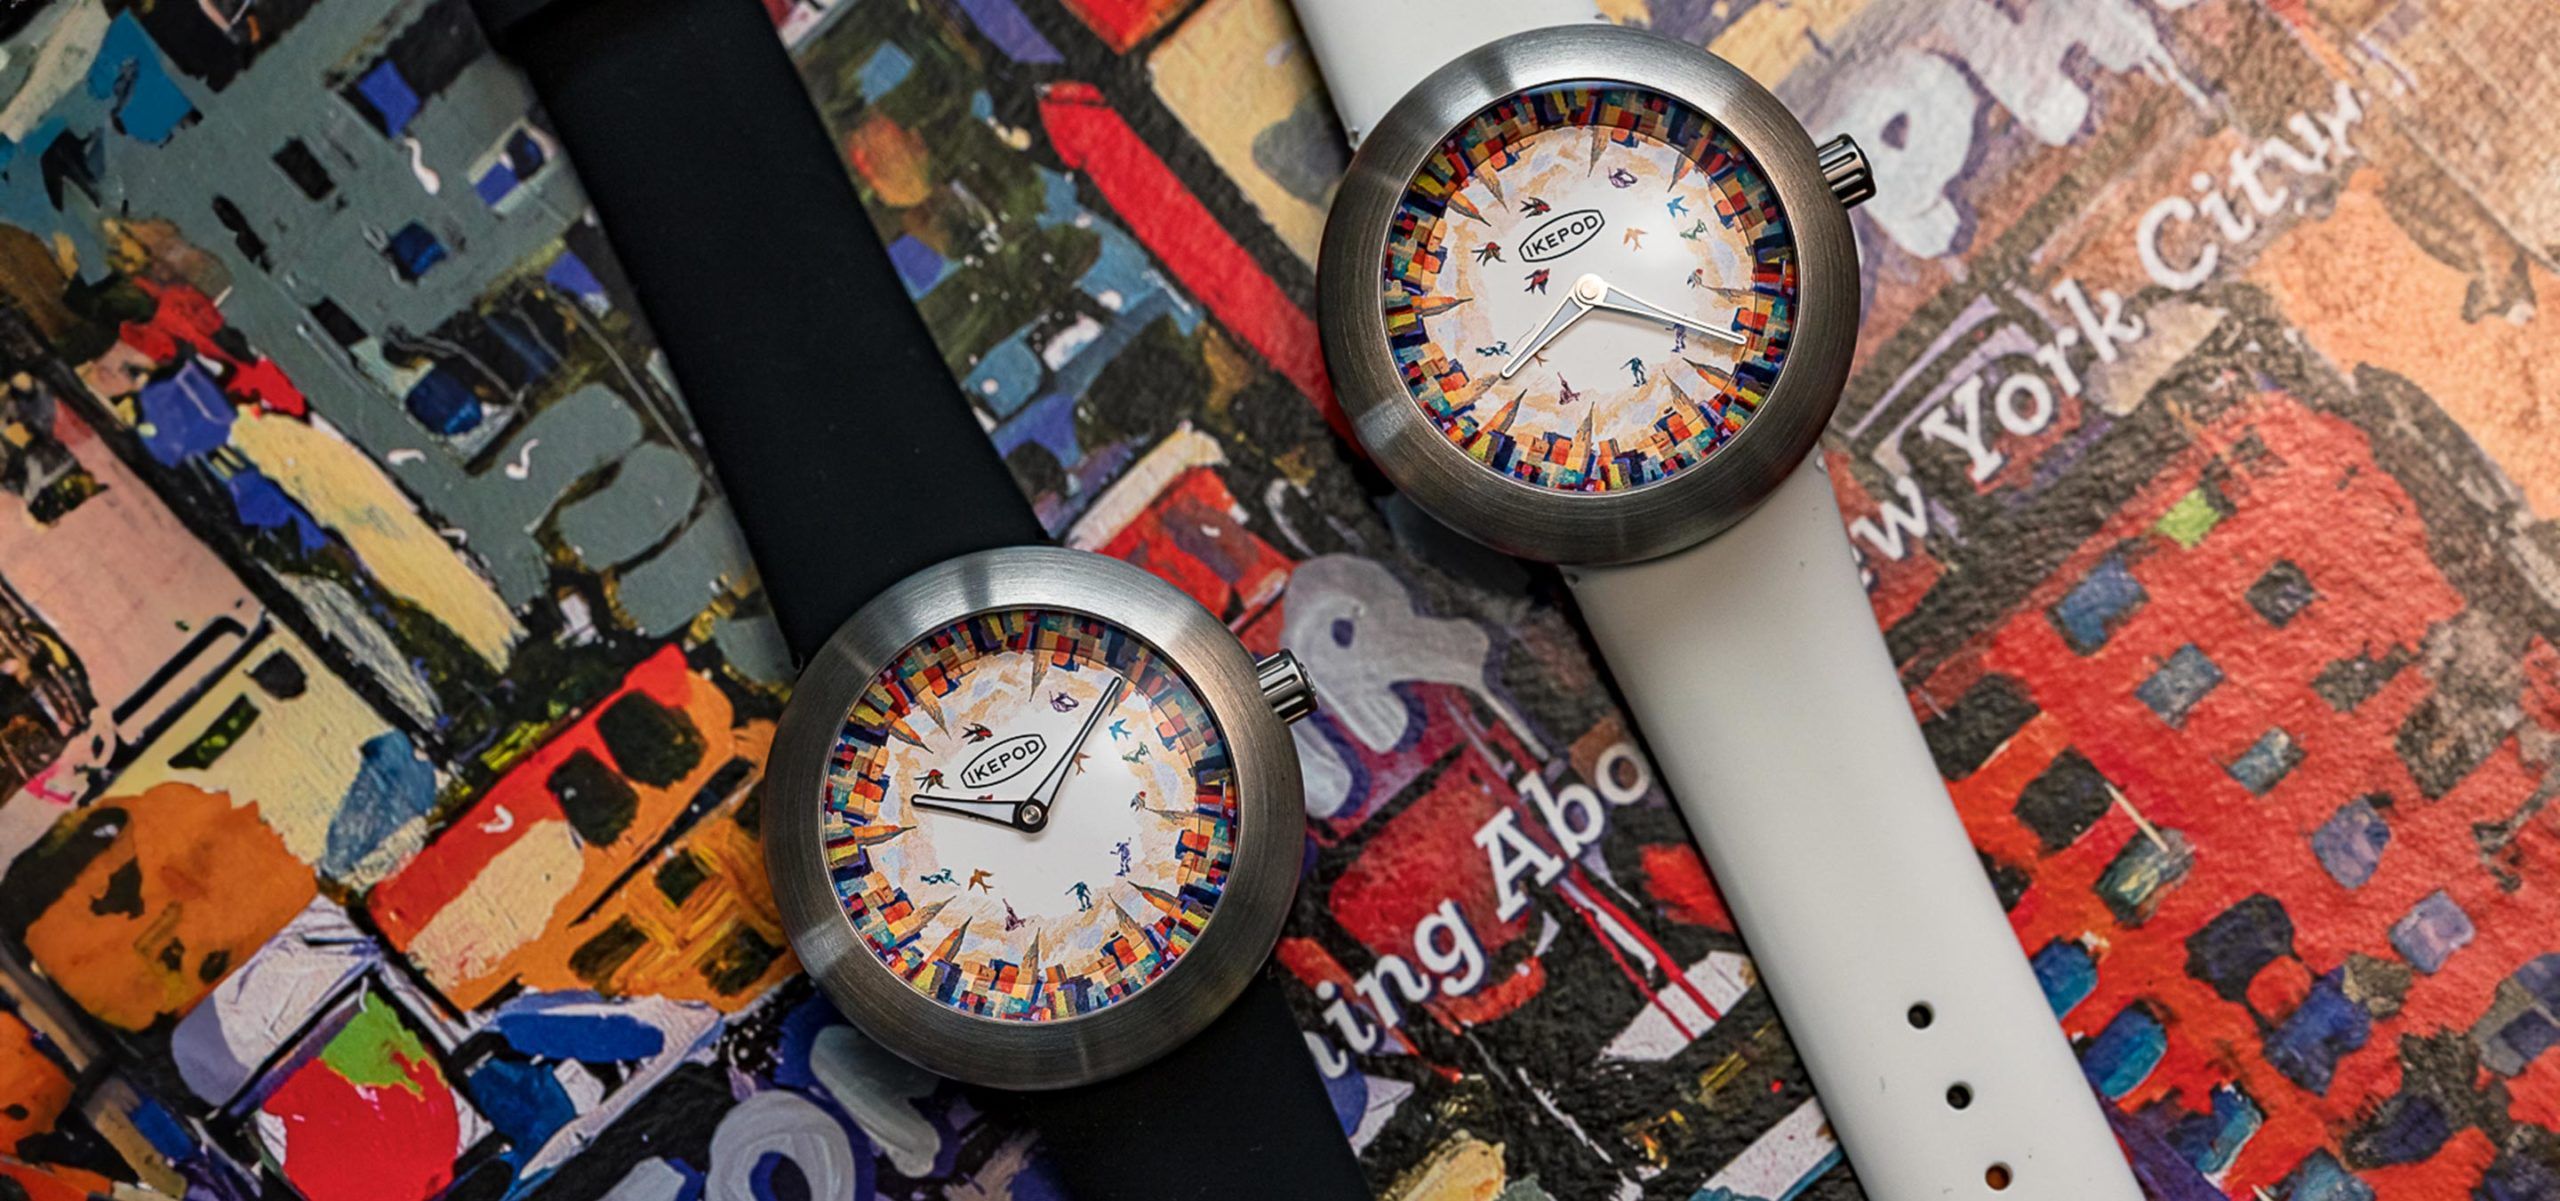 How The Era Of Ikepod Opened A New Chapter For Watchmaking